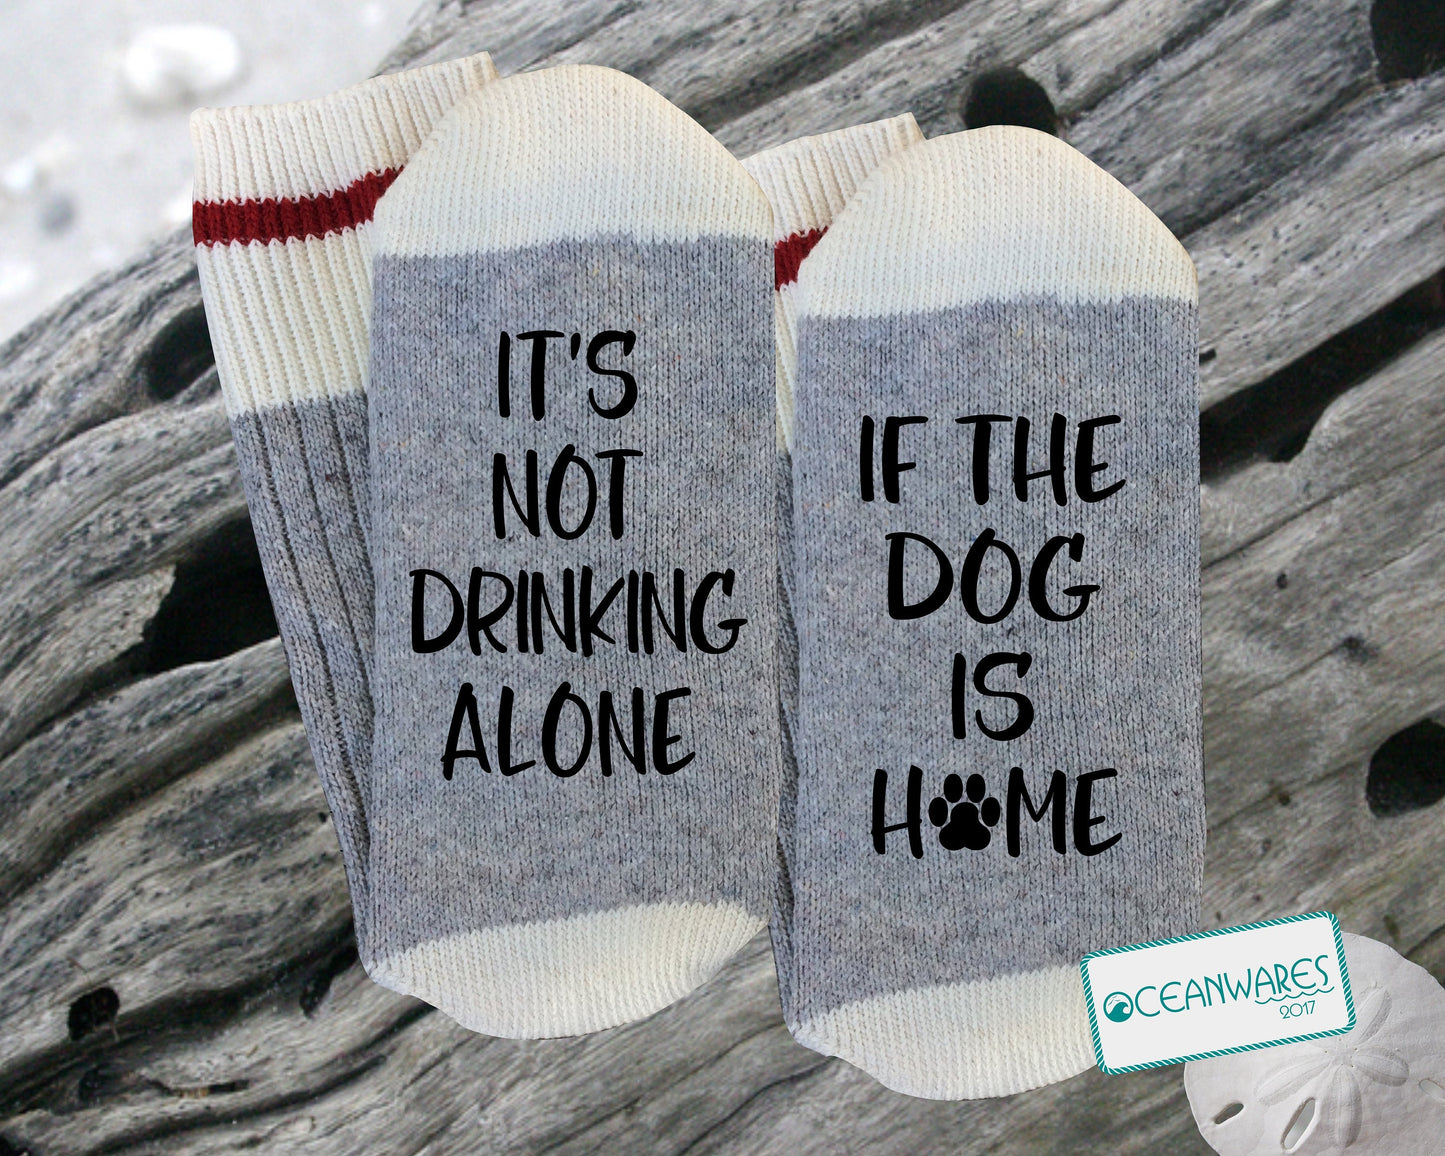 Dog Mom, It's not drinking alone if the dog is home, SUPER SOFT NOVELTY WORD SOCKS.